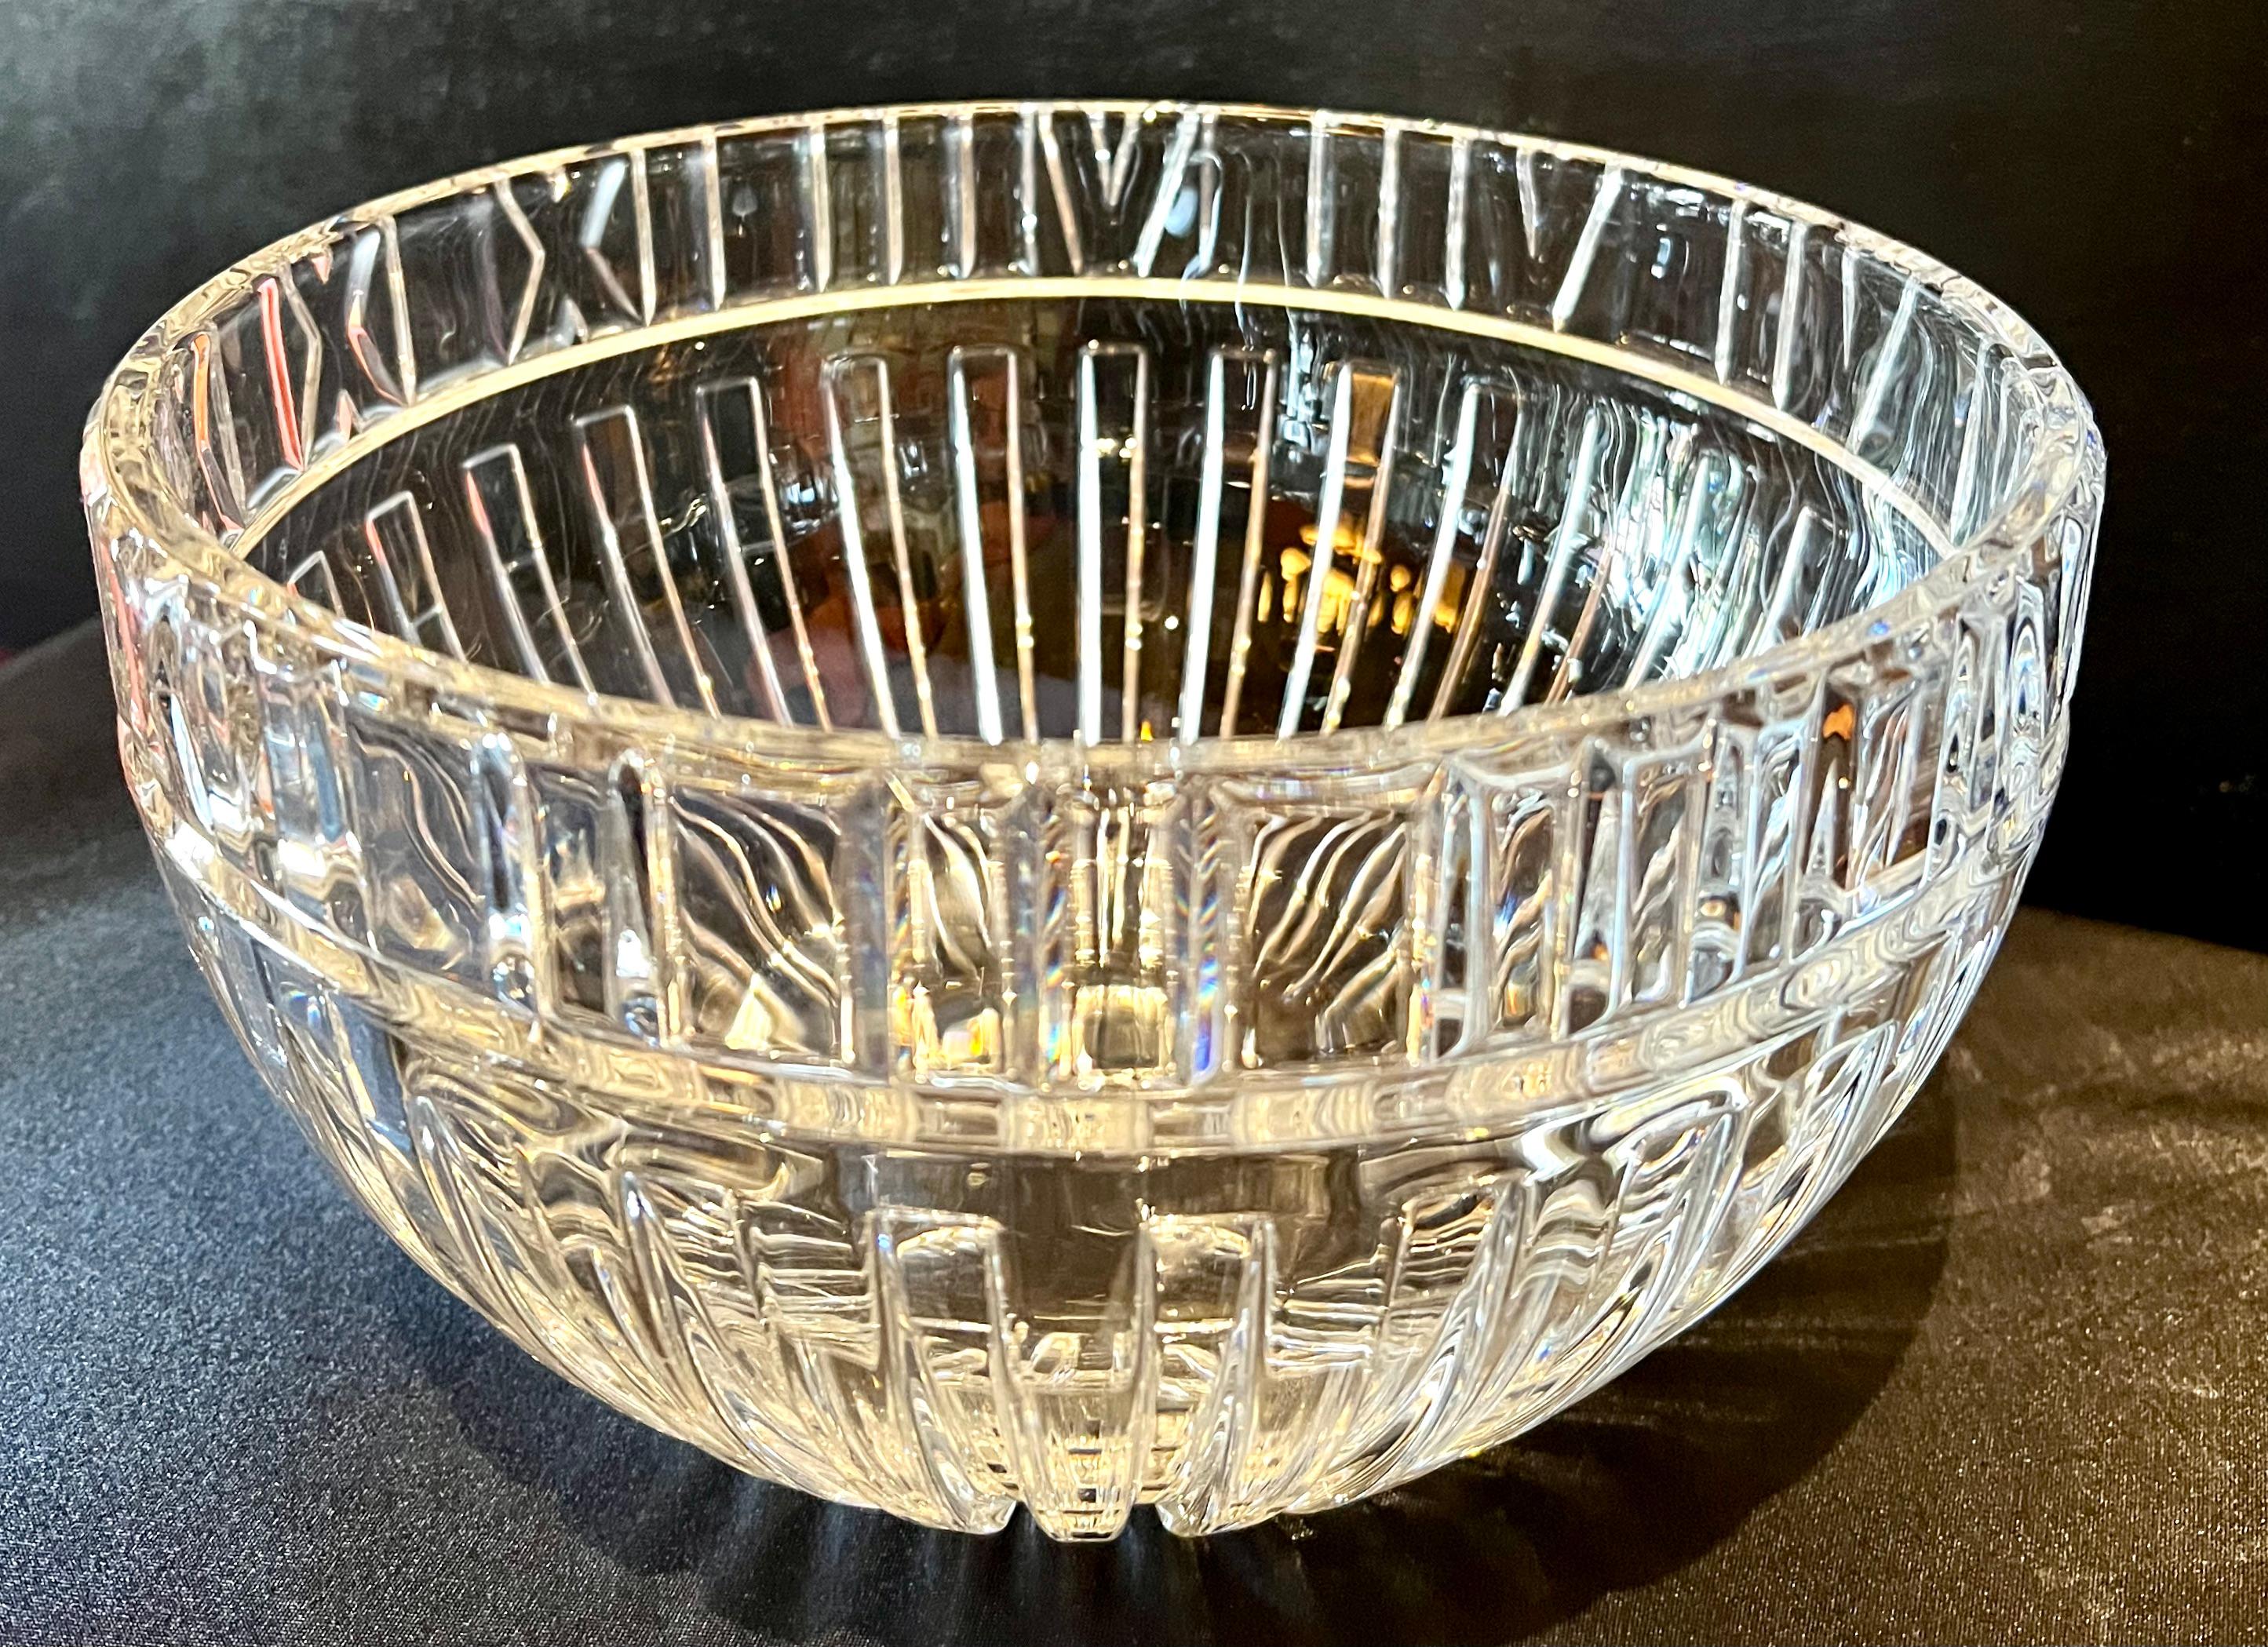 Tiffany Crystal Roman Numeral Bowl For Sale at 1stDibs